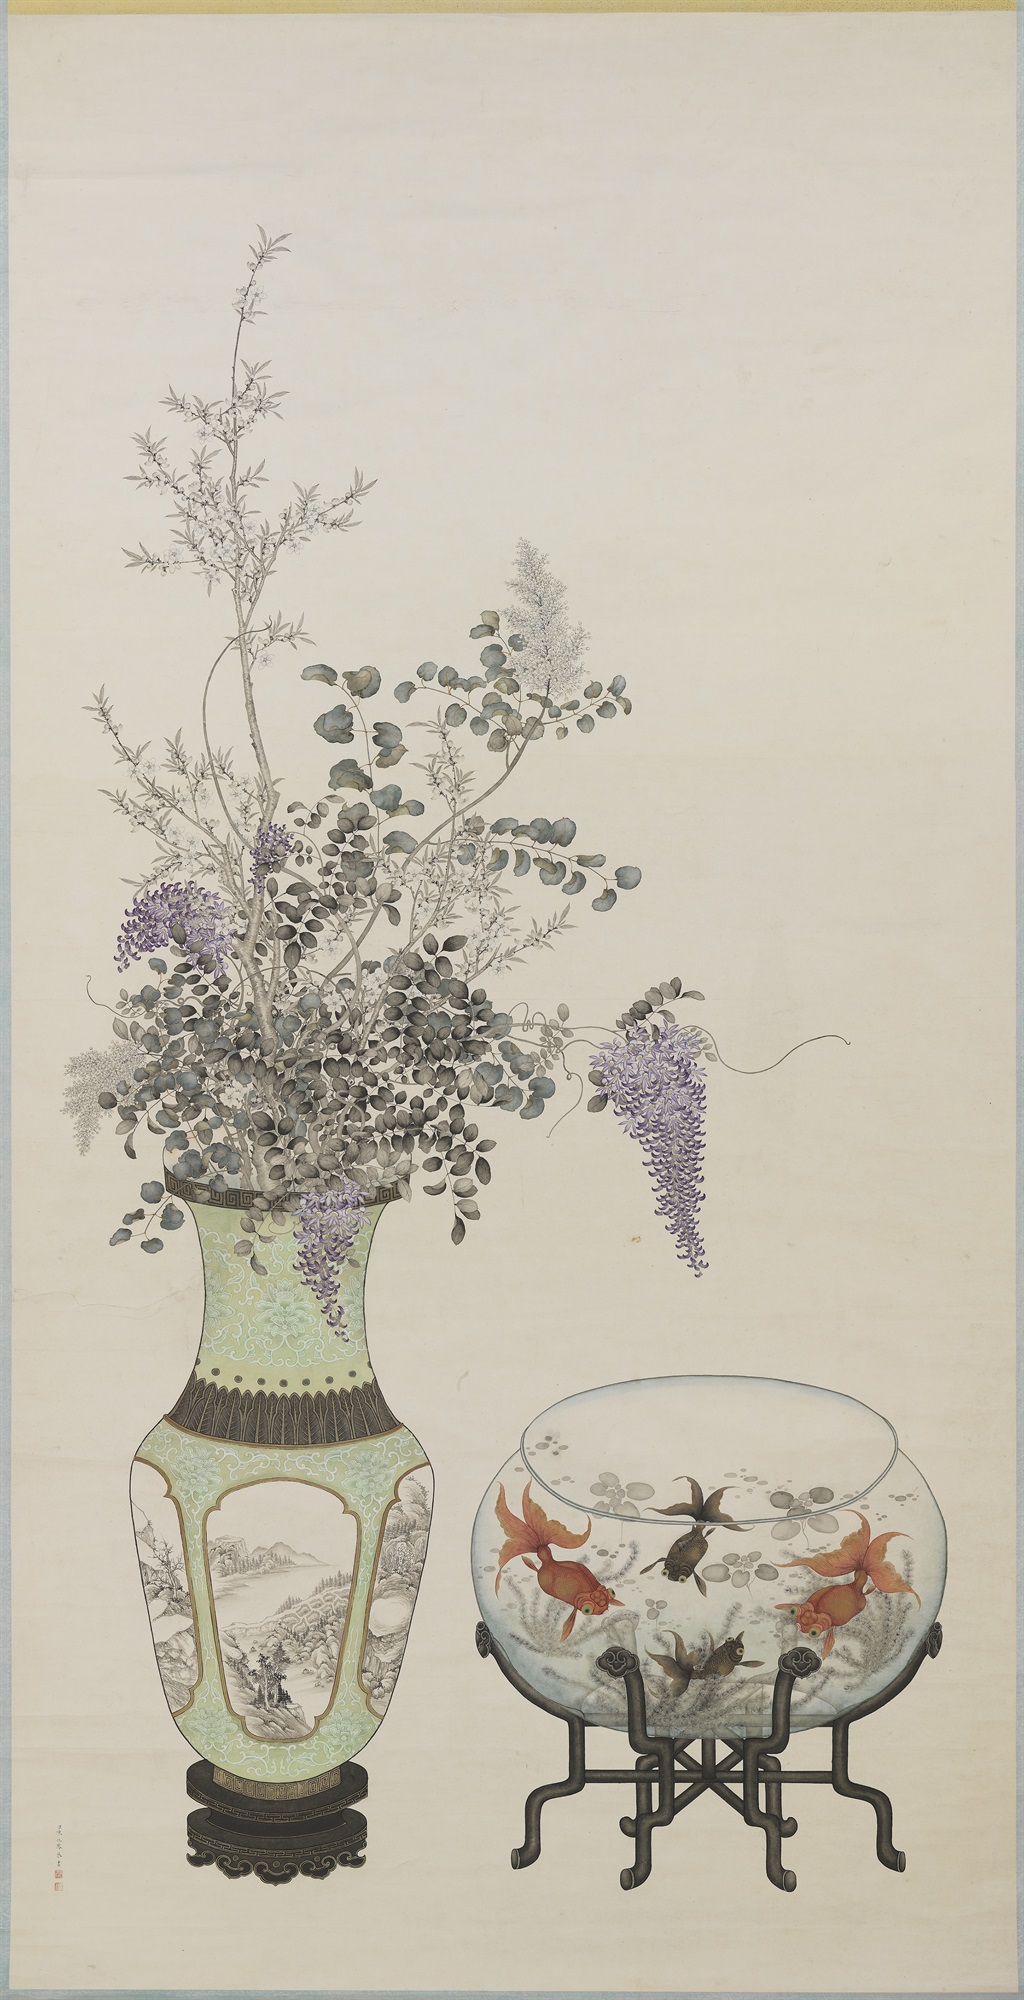 Flowers and Plants [Bogu/Assorted Antiques]   Painting Chen Zhaofeng, Qing dynasty